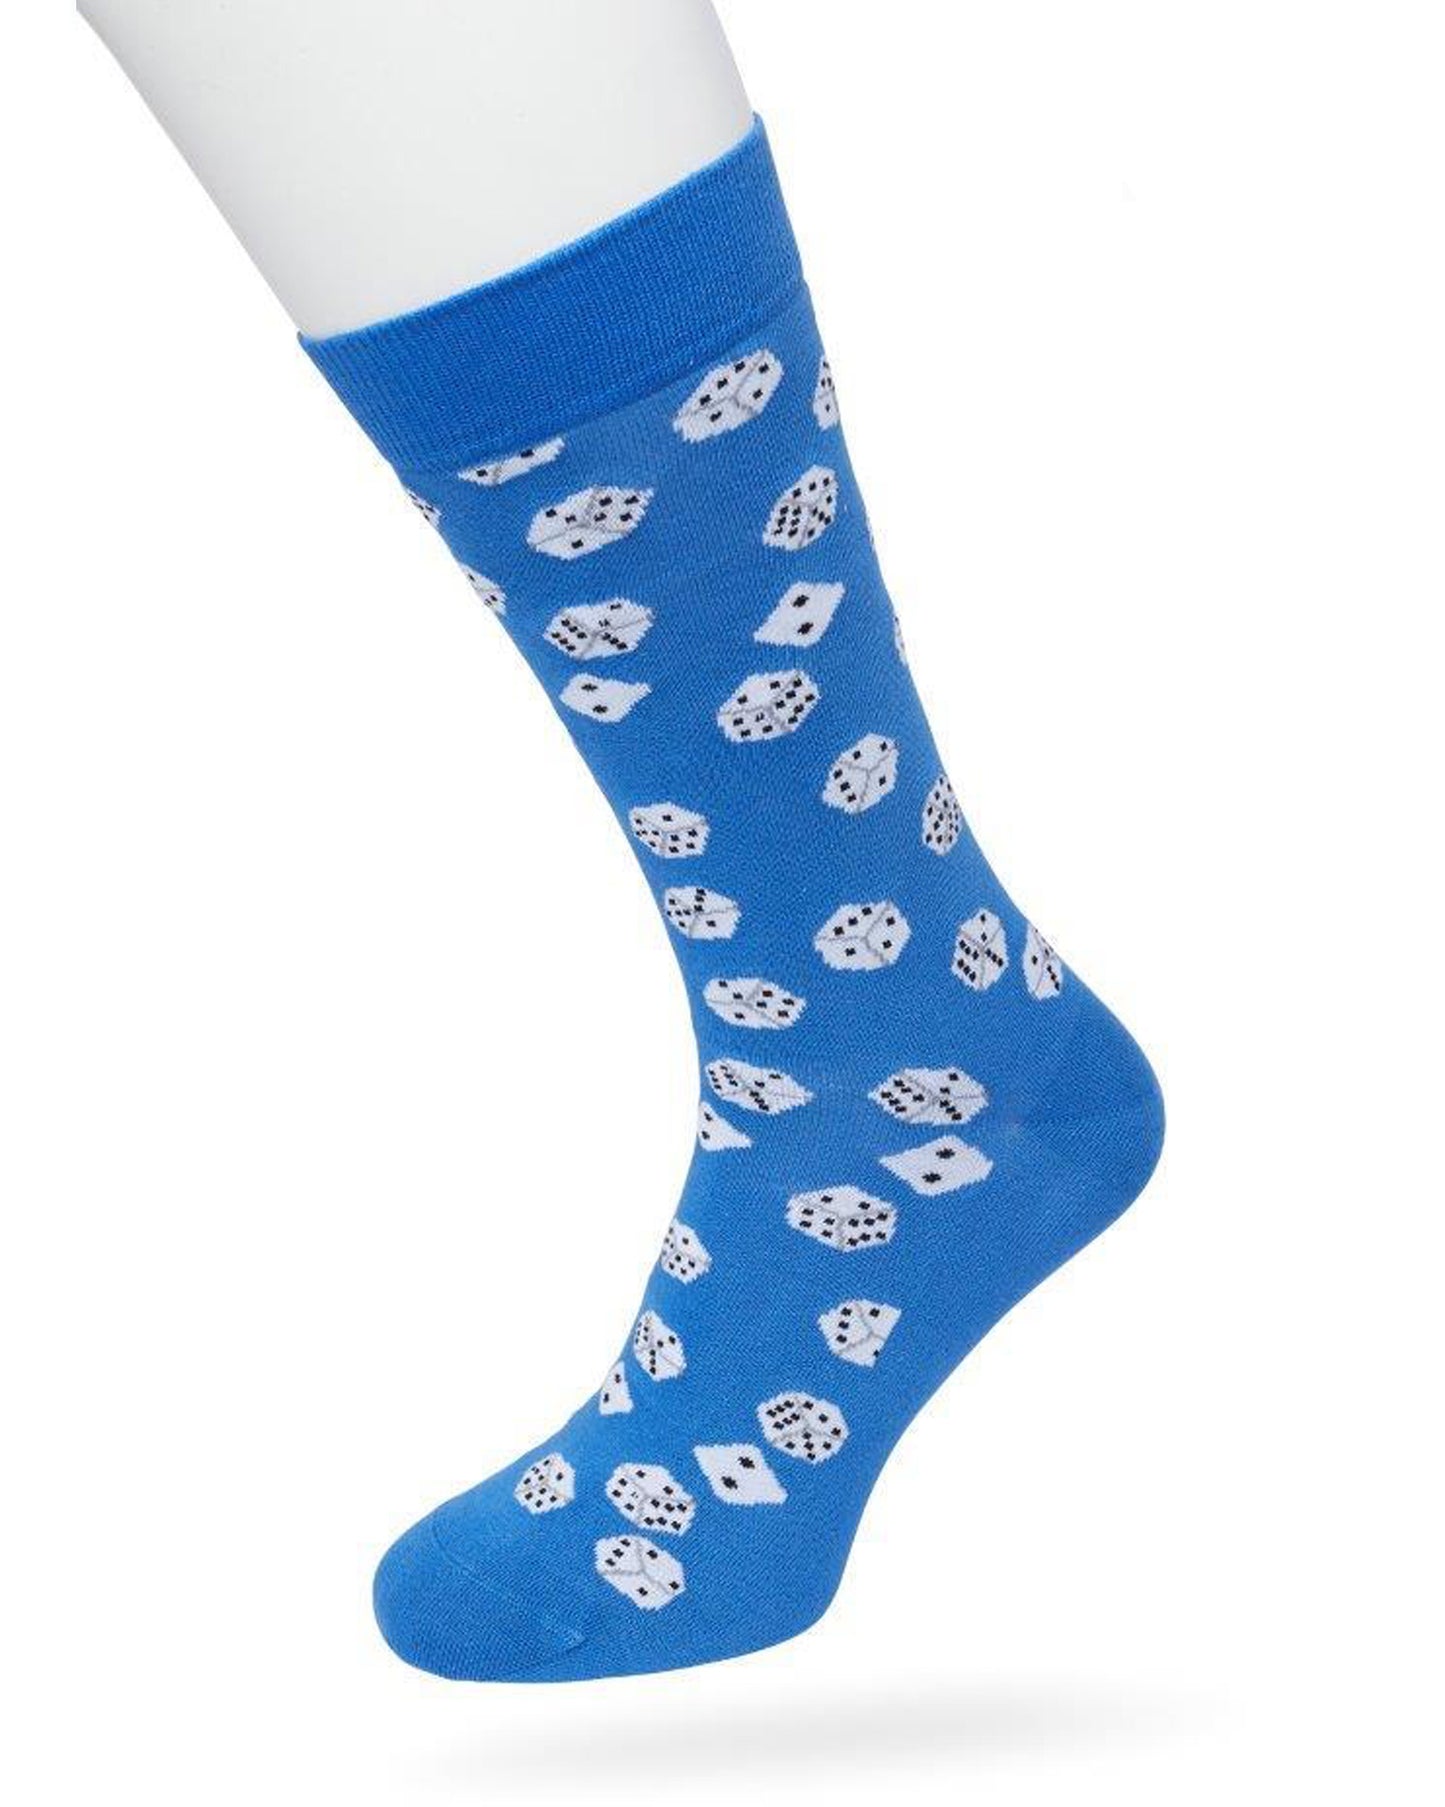 Bonnie Doon Dice Sock - Sky Blue cotton crew length ankle men's socks with white and black dice pattern.